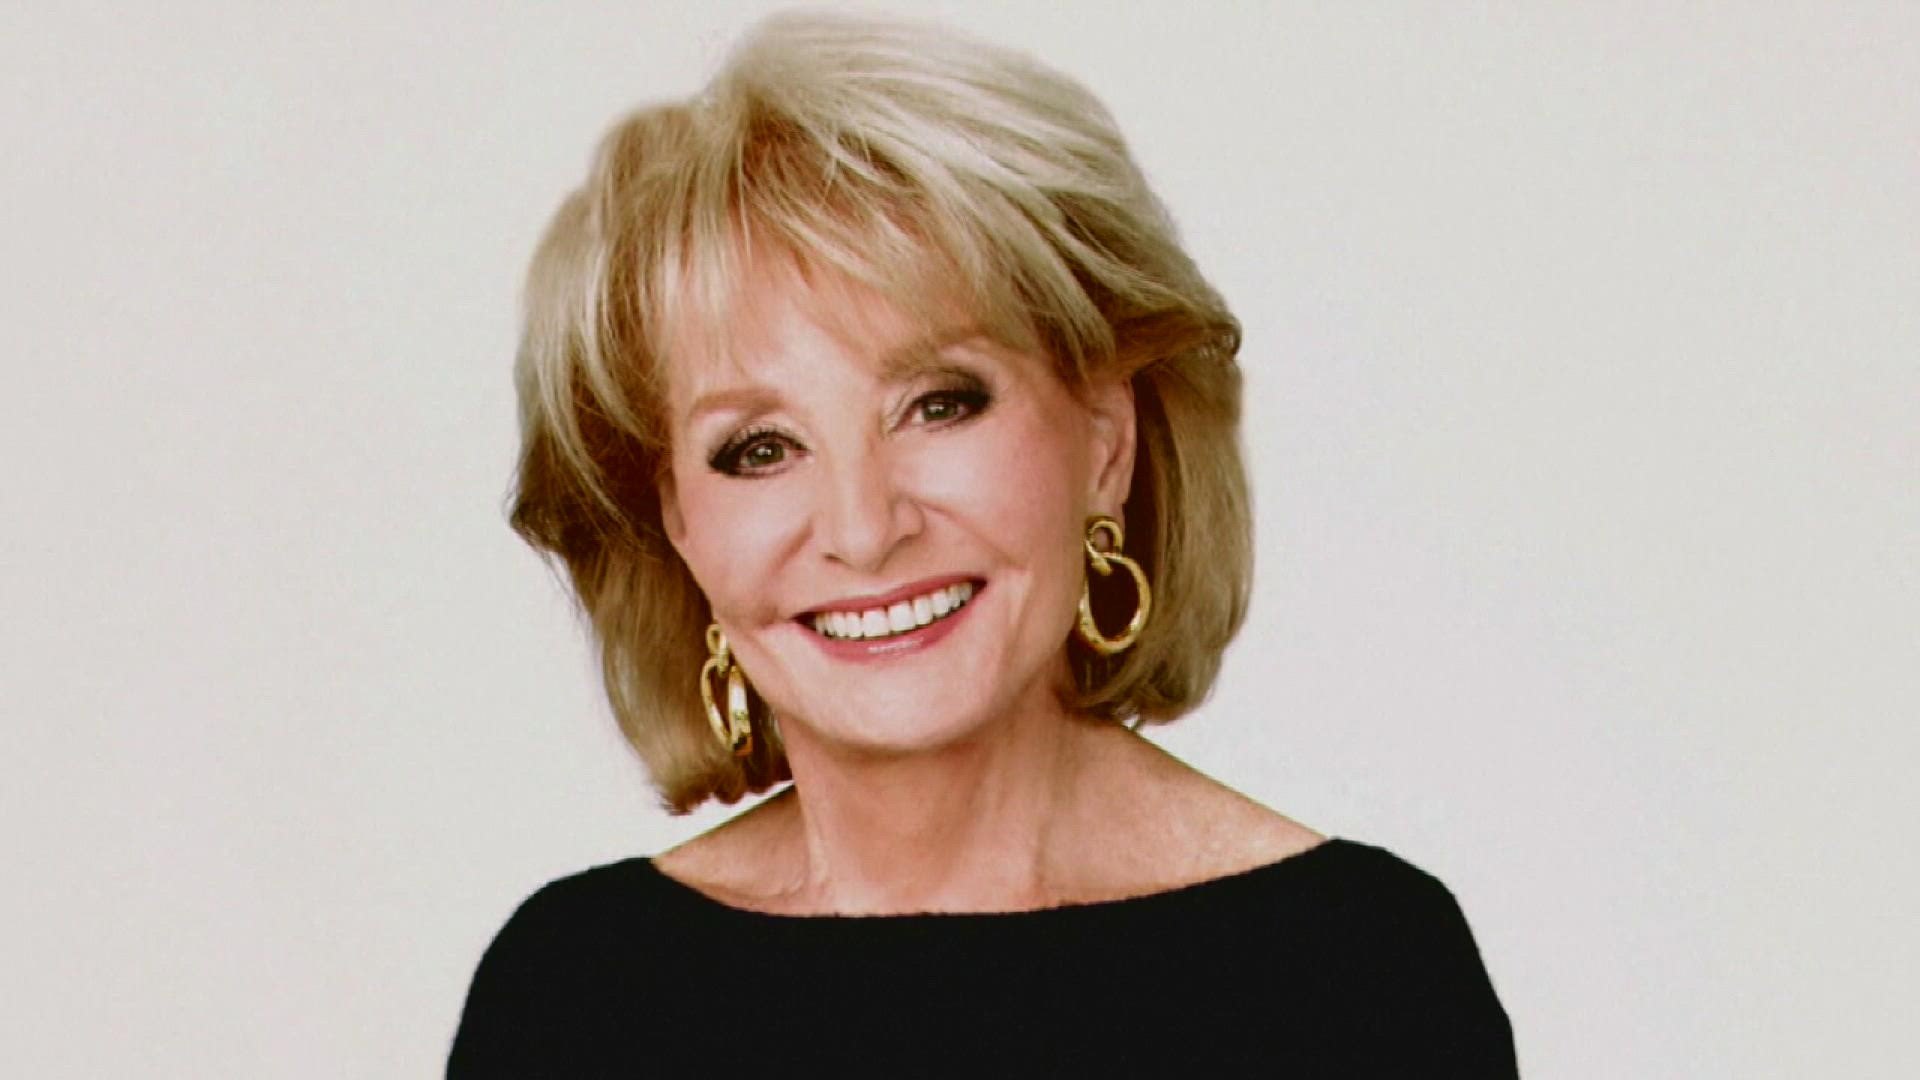 Walters was the first female co-anchor of a network evening news program, launched a beloved daytime talk show and shattered the glass ceiling for women in TV news.